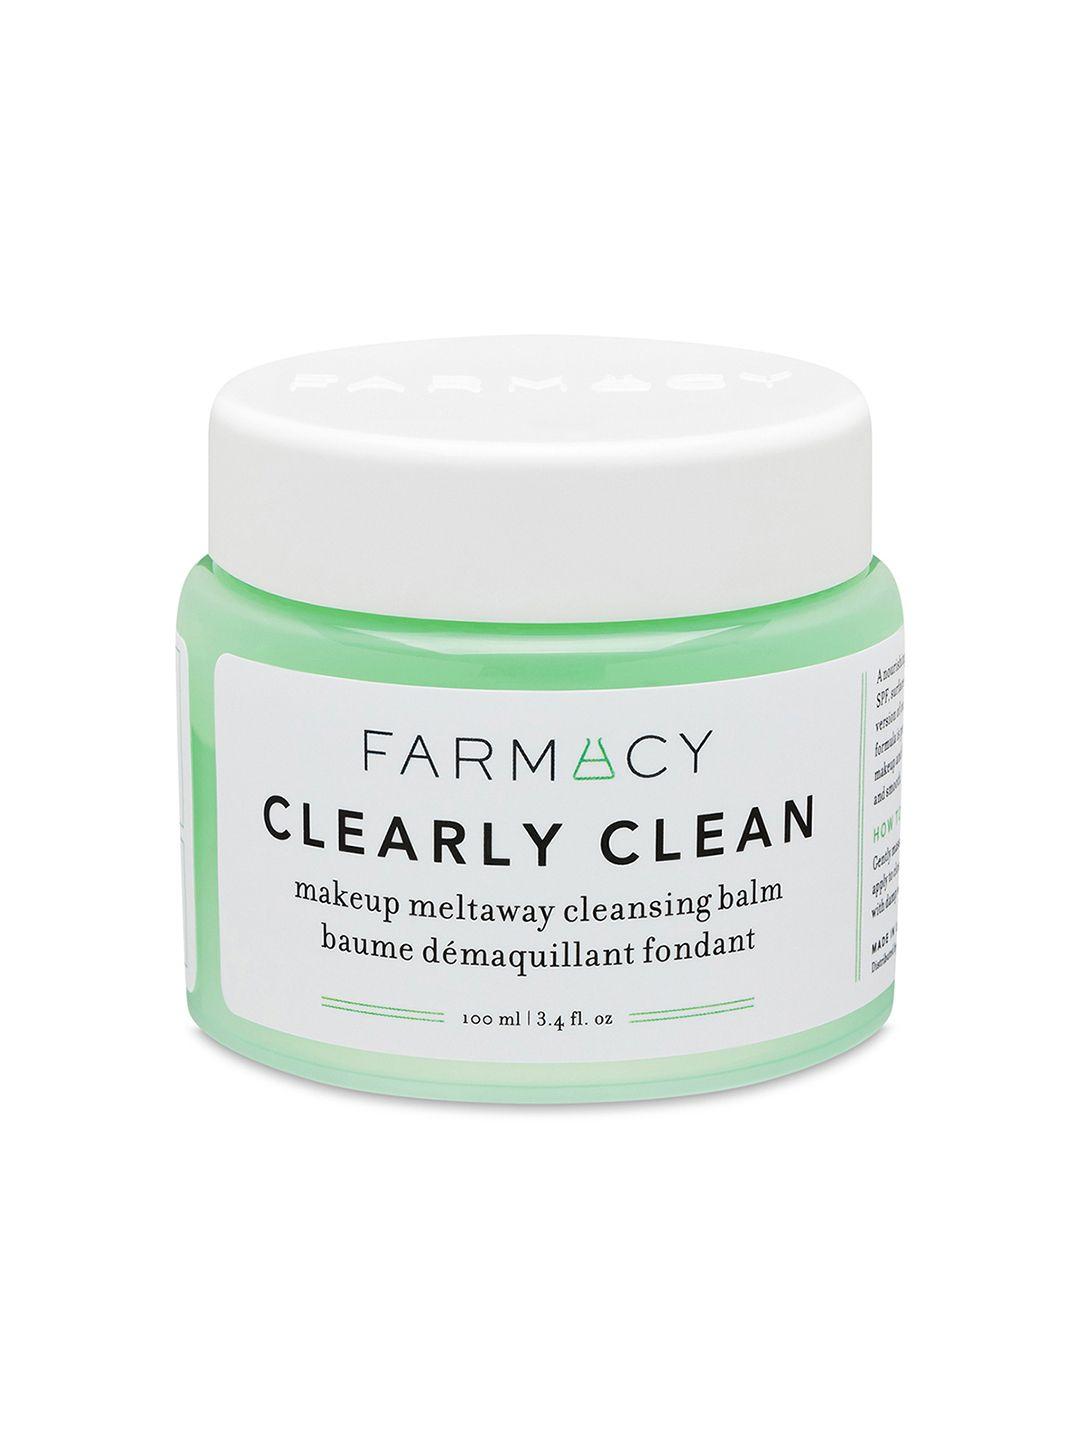 farmacy beauty clearly clean makeup meltaway cleansing balm - 100 ml